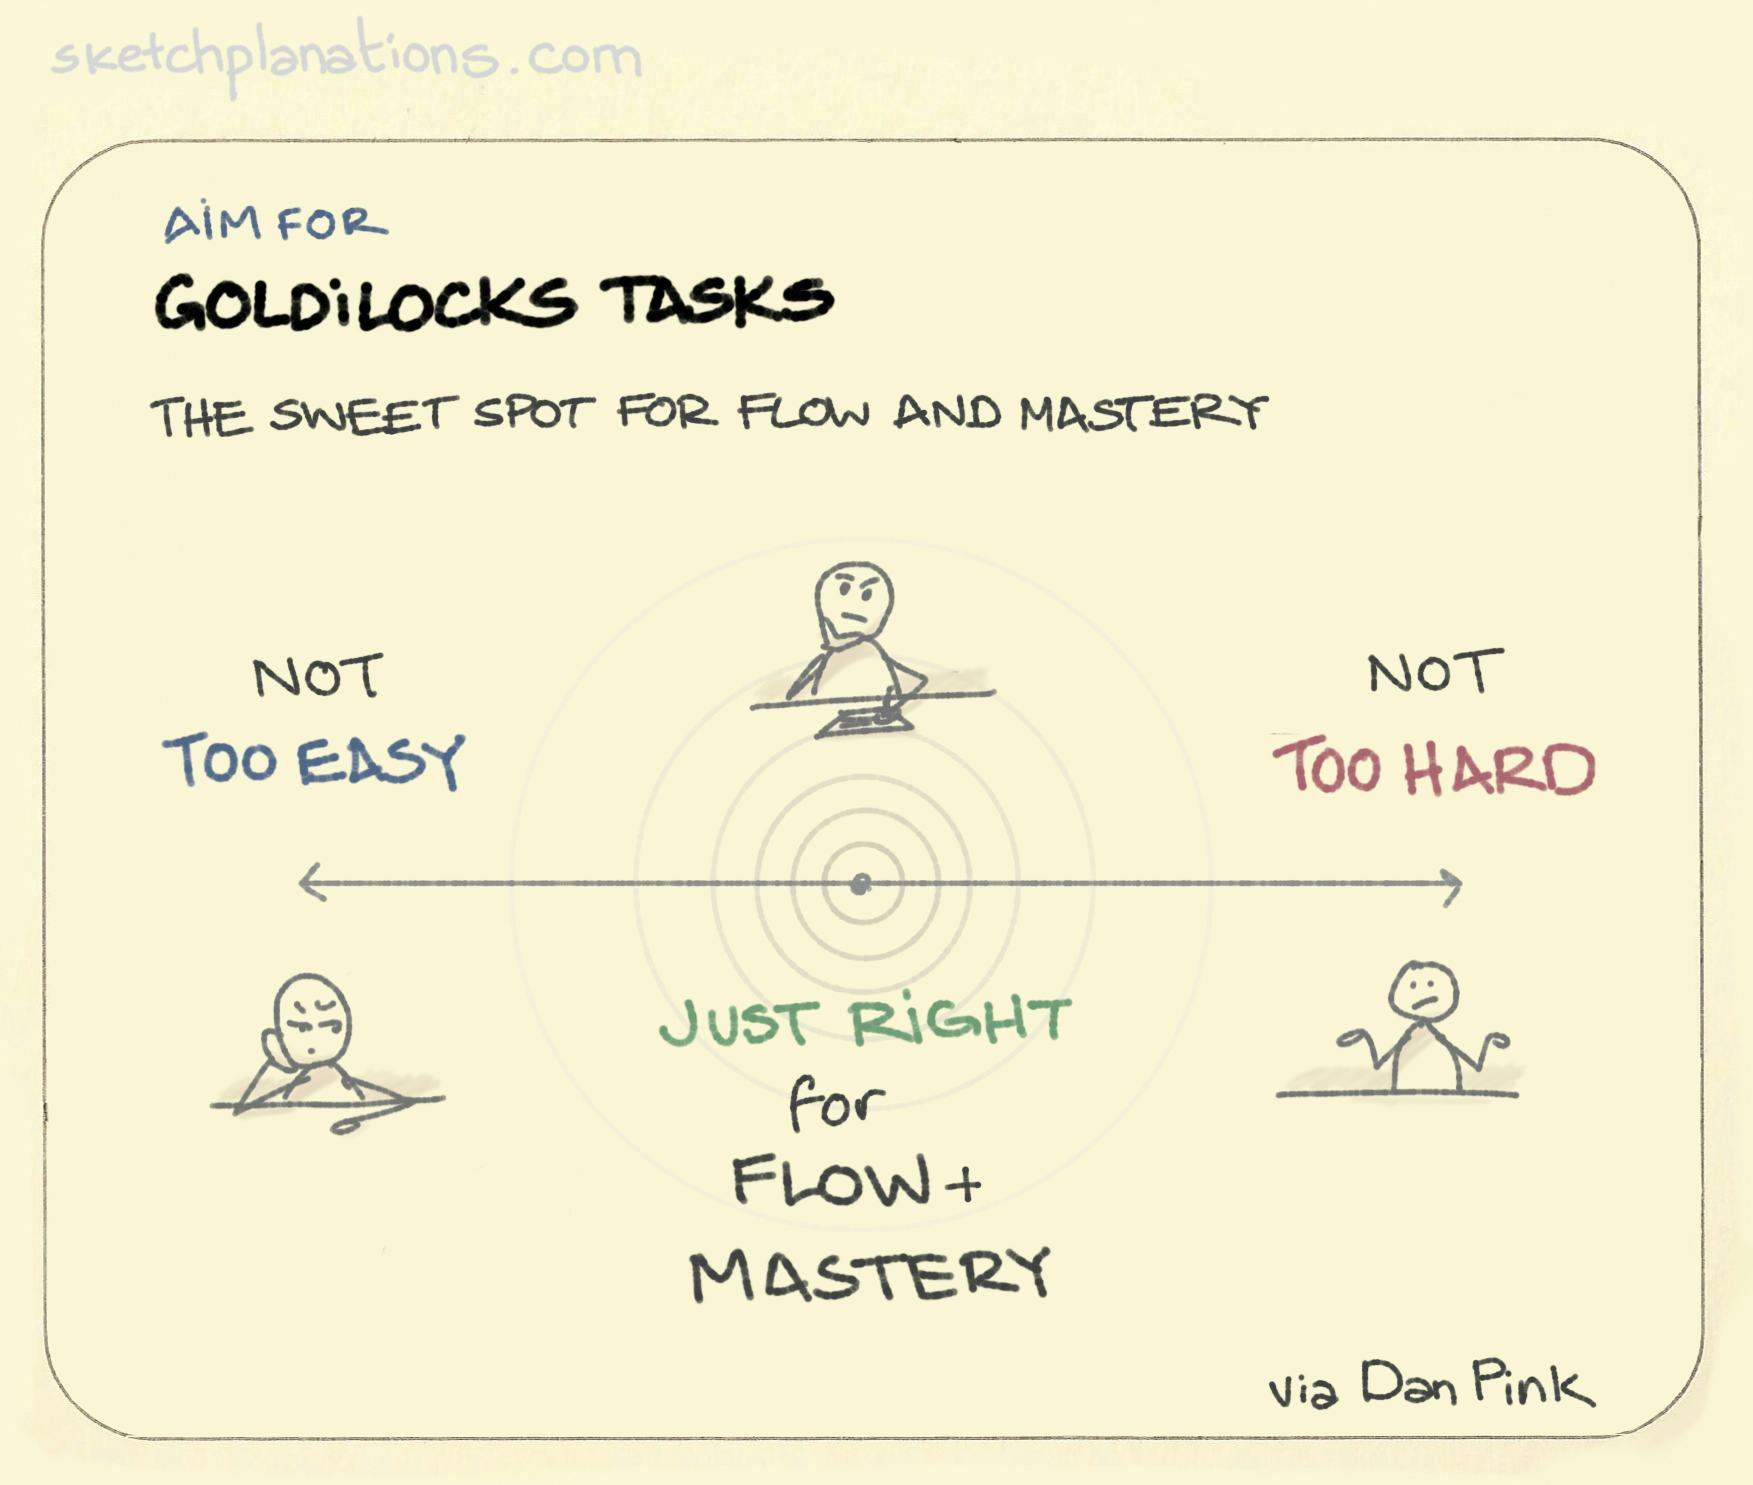 Goldilocks Tasks: a spectrum where the challenge is not too easy, not too hard, but just right for flow and mastery